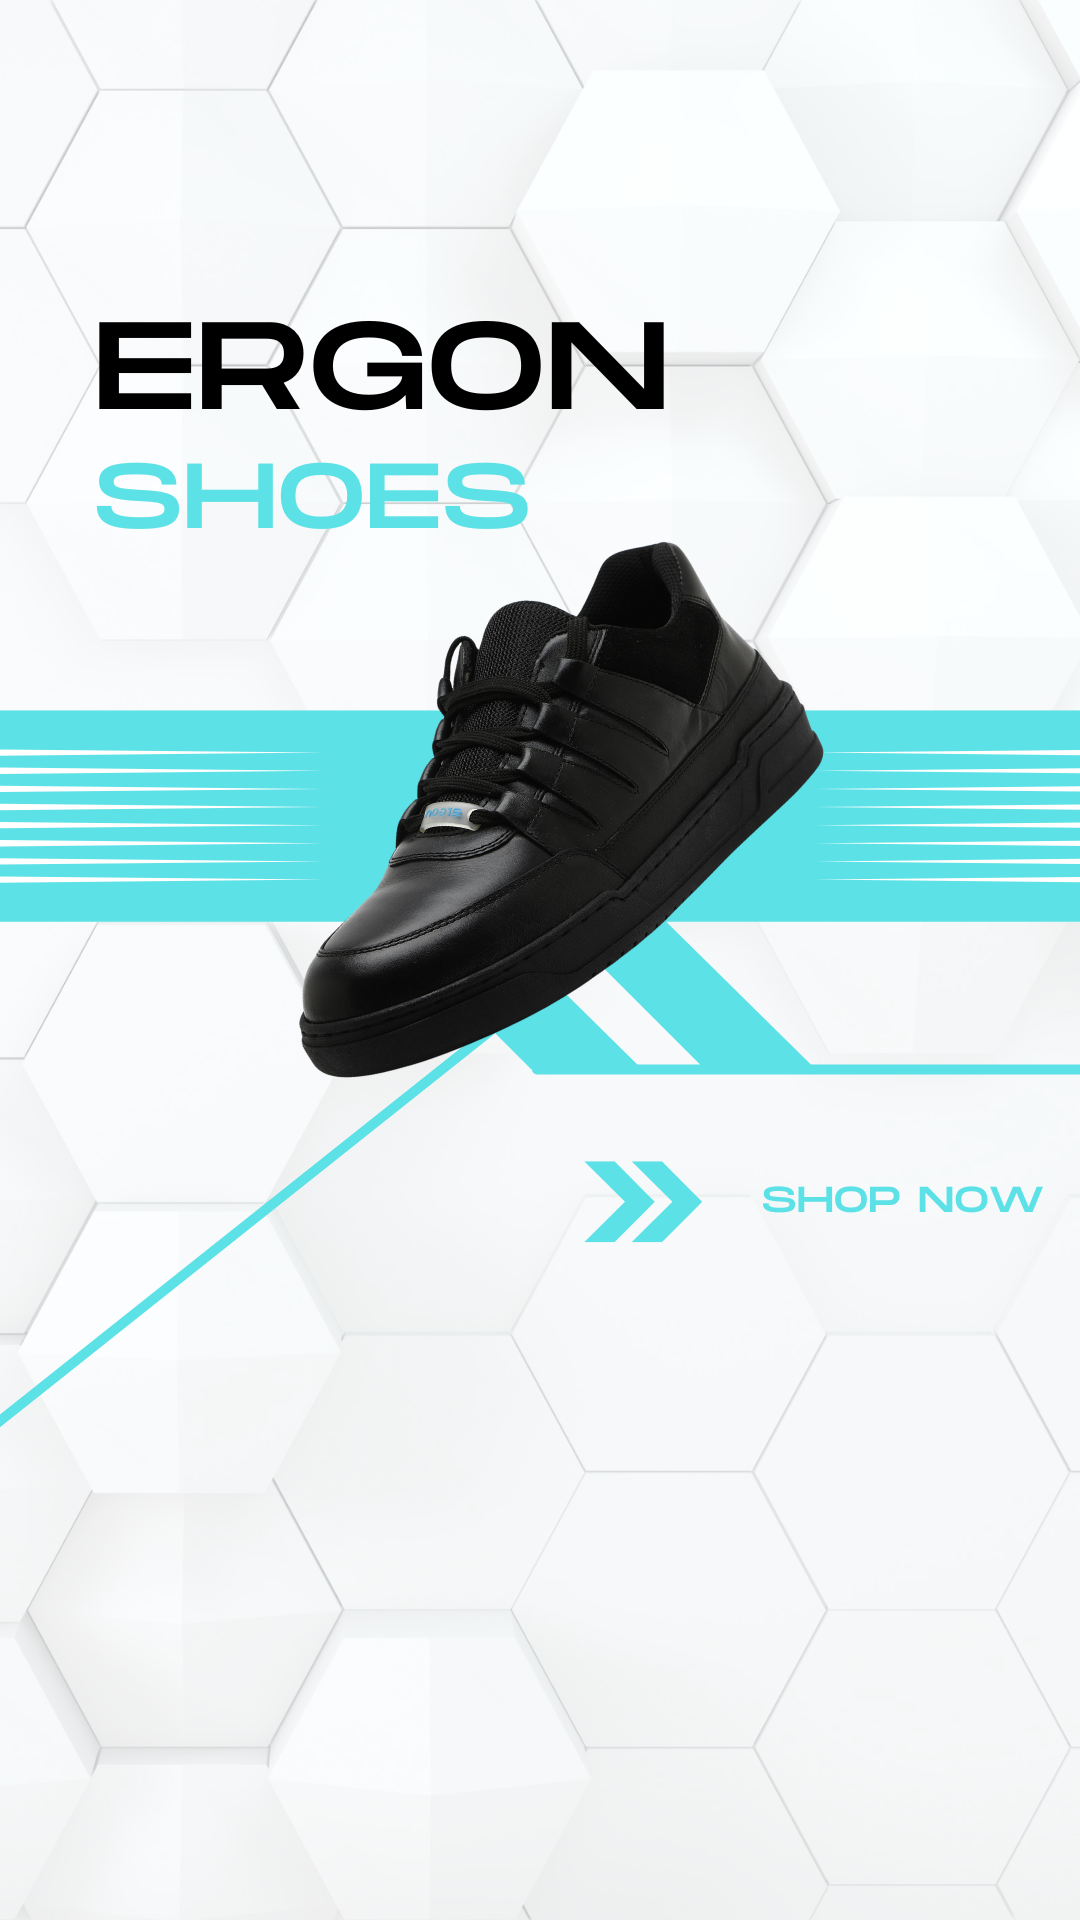 Modern_Red_Black_Realistic_Shoes_Sale_Promotion_Instagram_Post.png